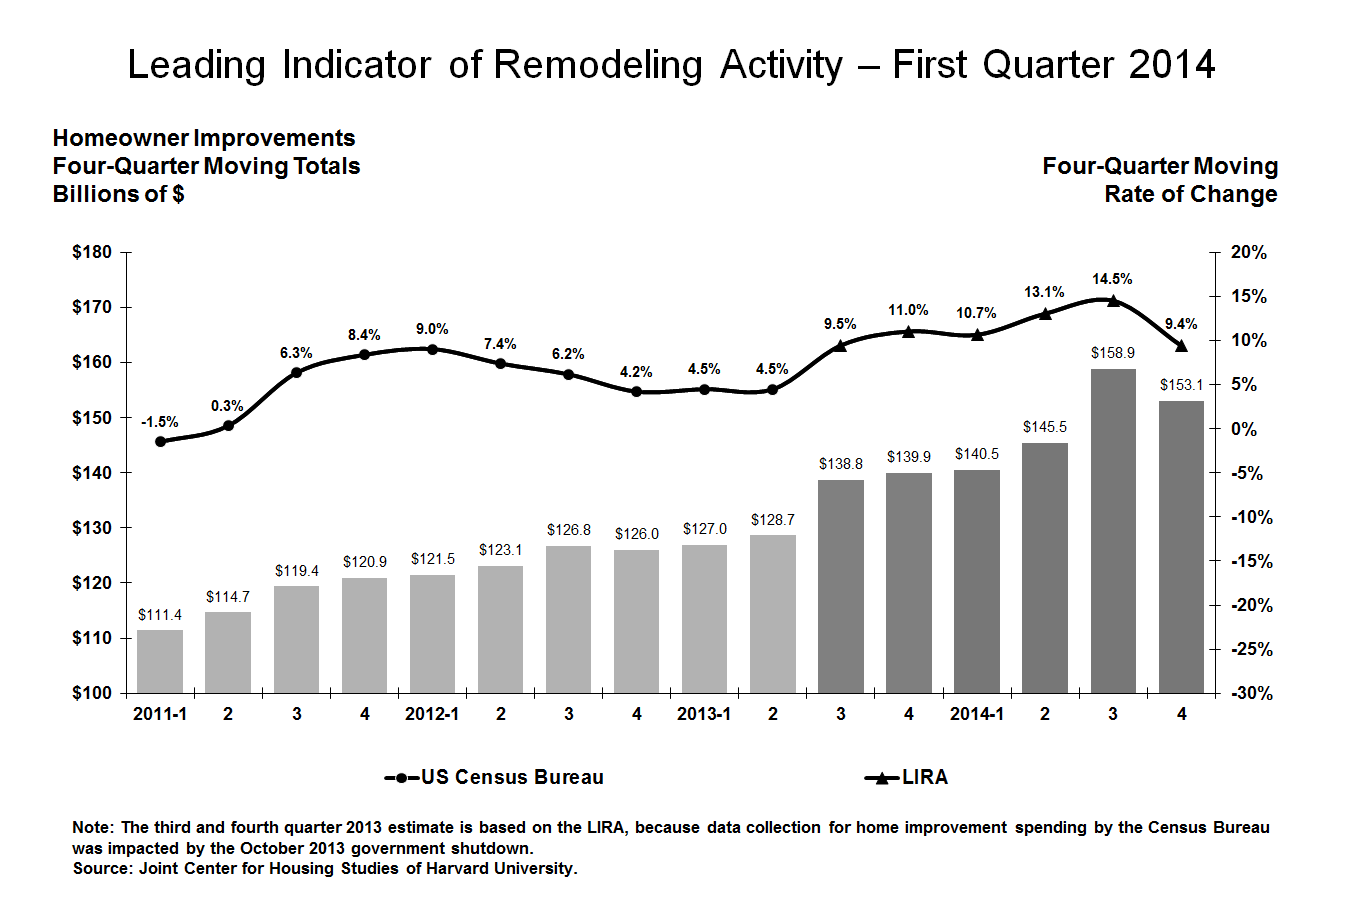 The JCHS Leading Indicator of Remodeling Activity (LIRA) for the first quarter 2014. 